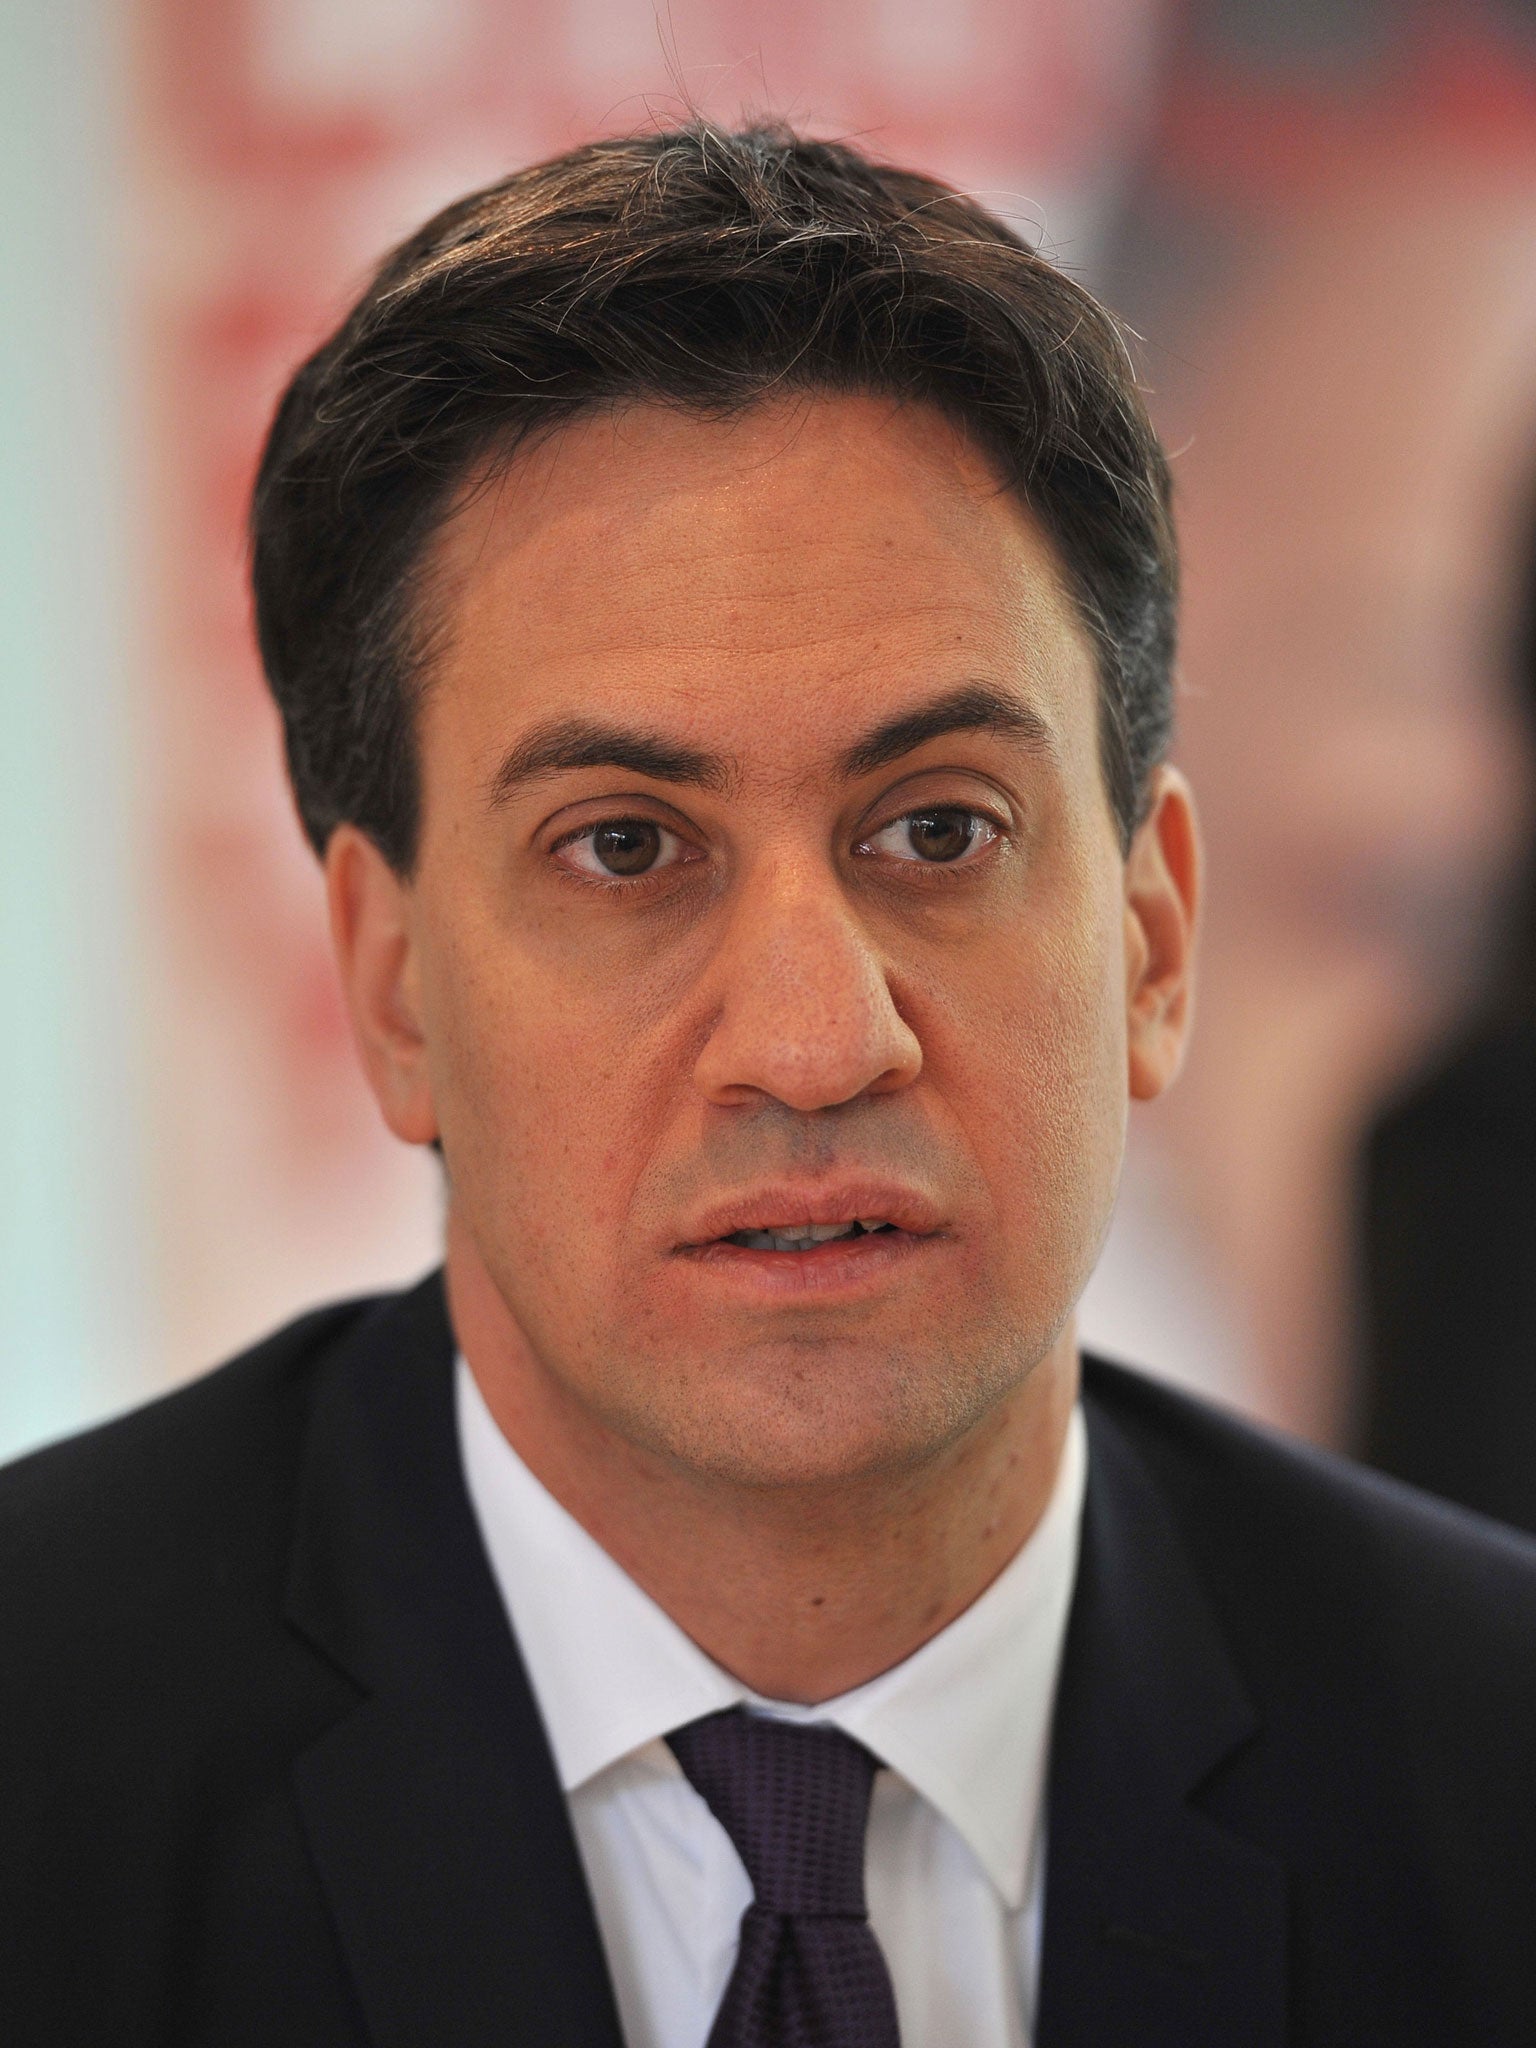 An adviser to Ed Miliband has urged the Labour leader to propose a referendum on Britain's EU membership